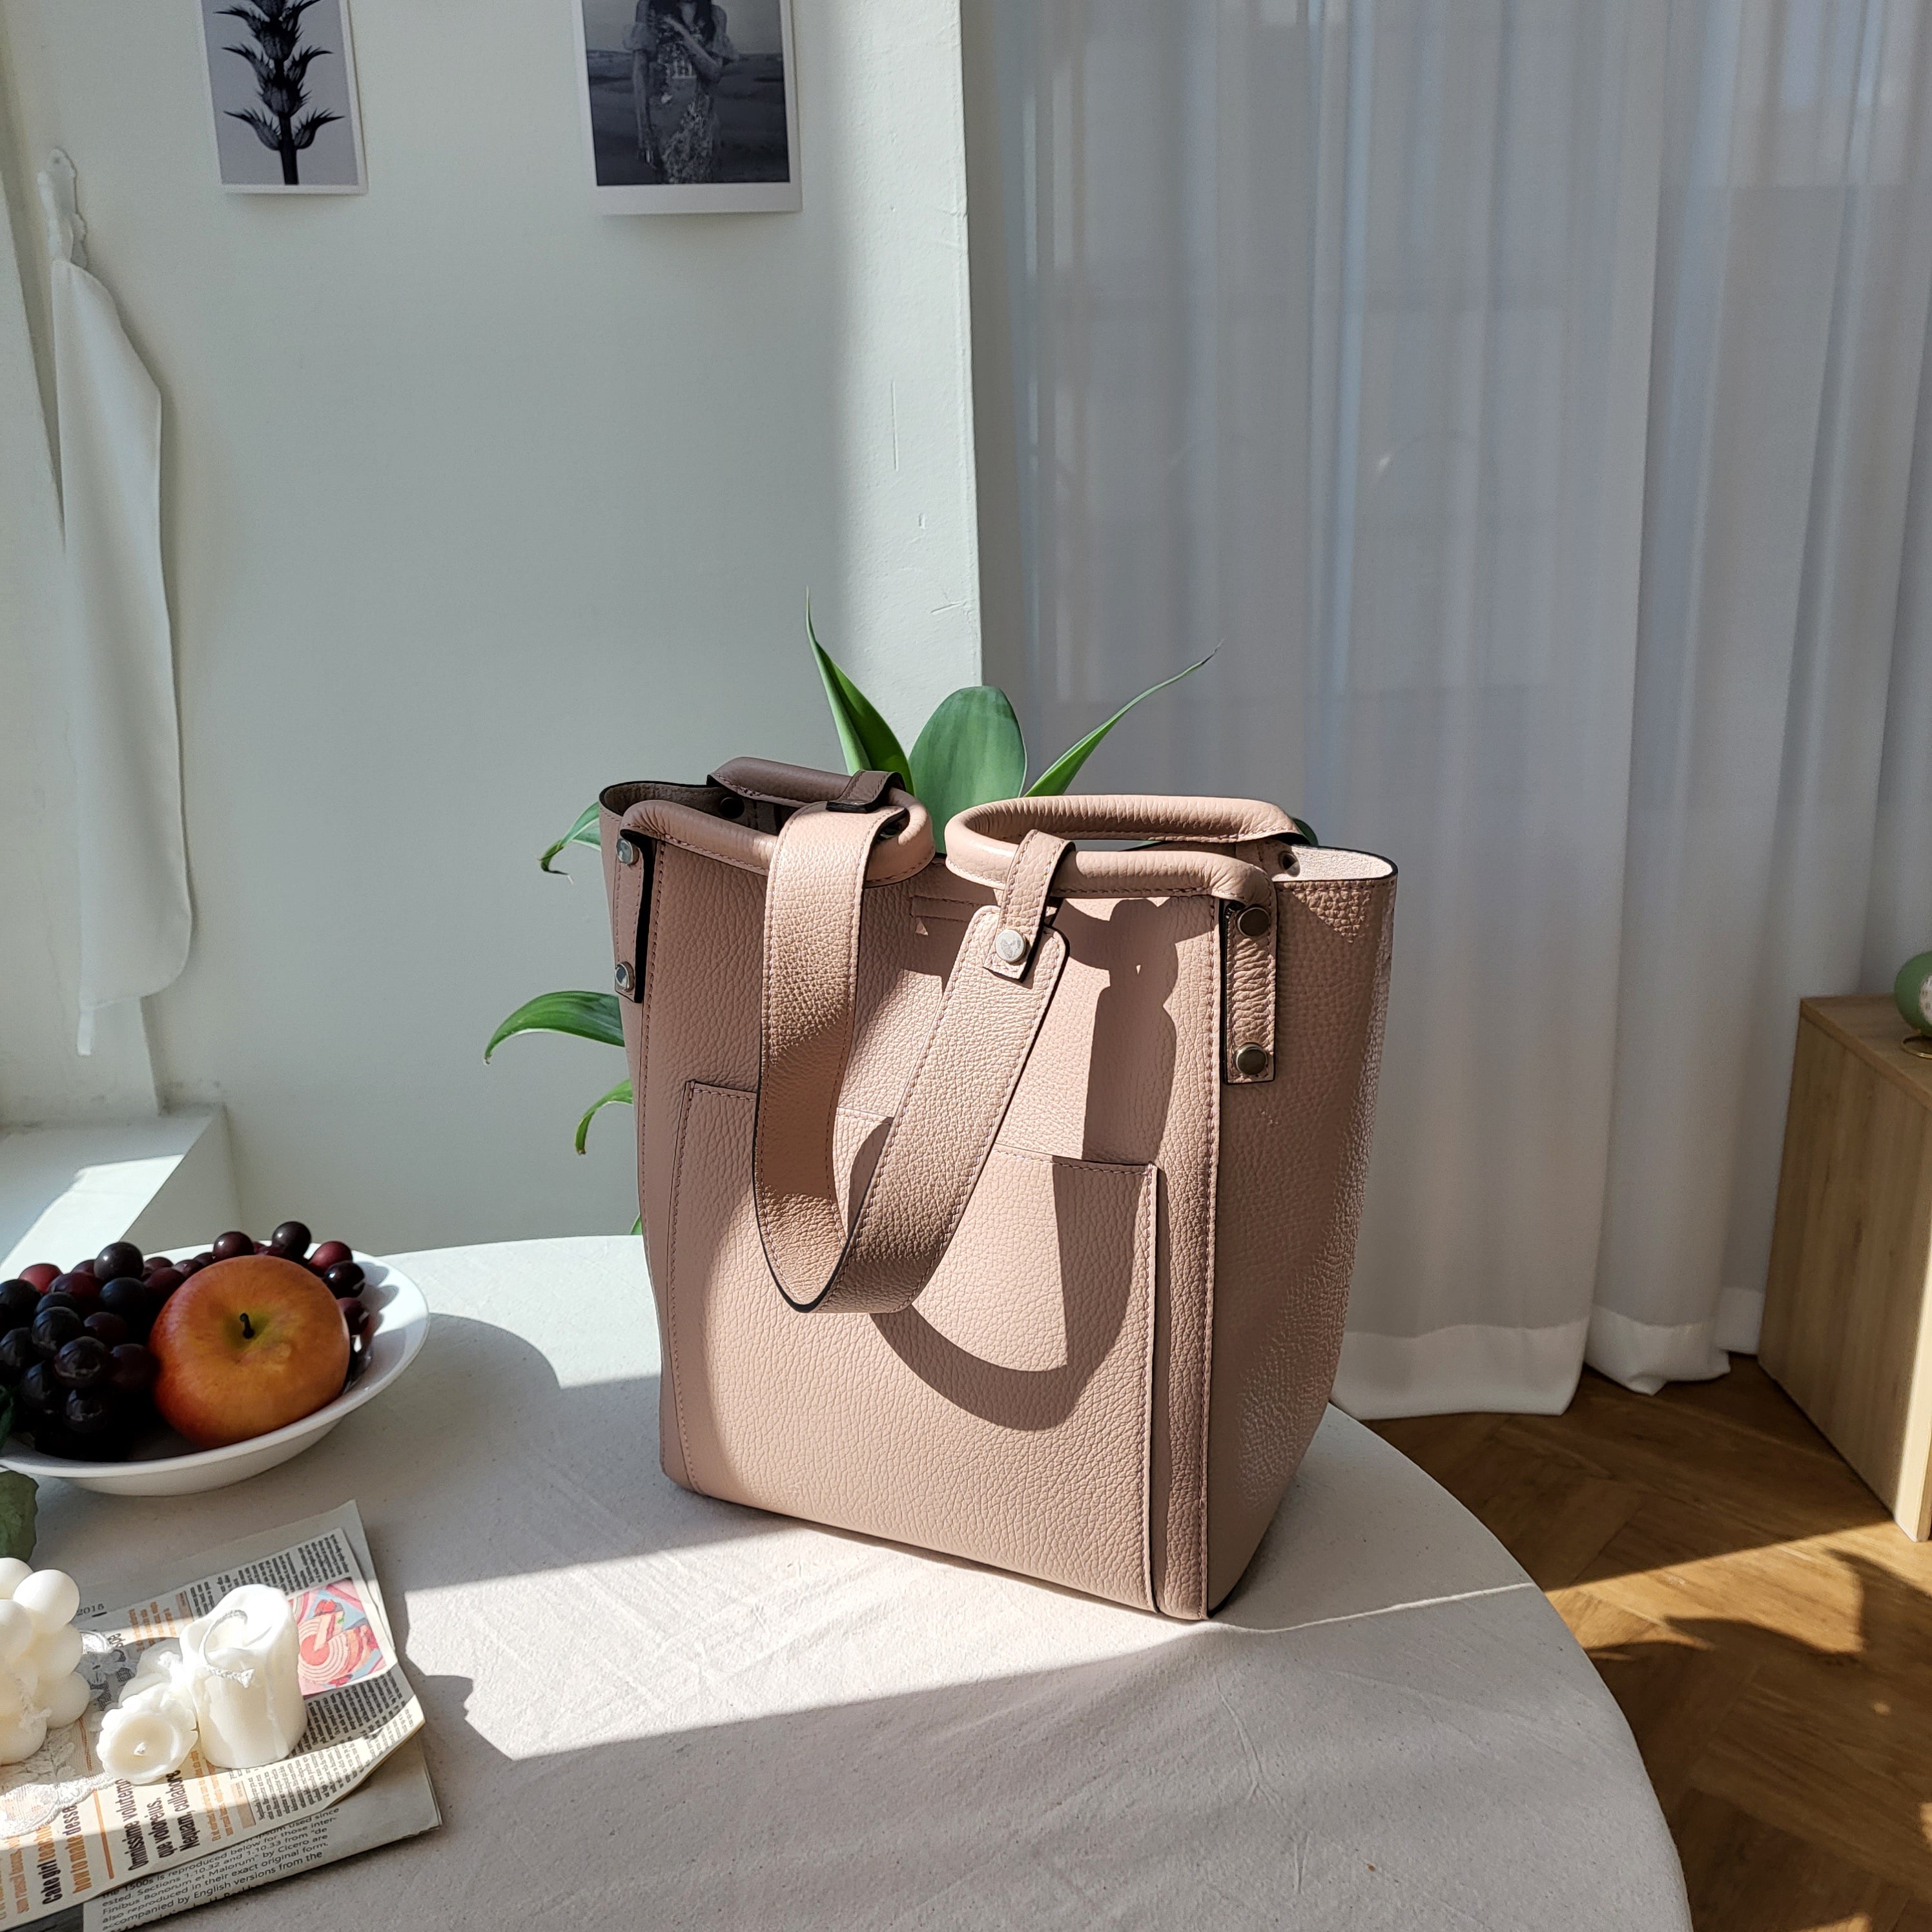 Iminglobal Lucia Leather Tote